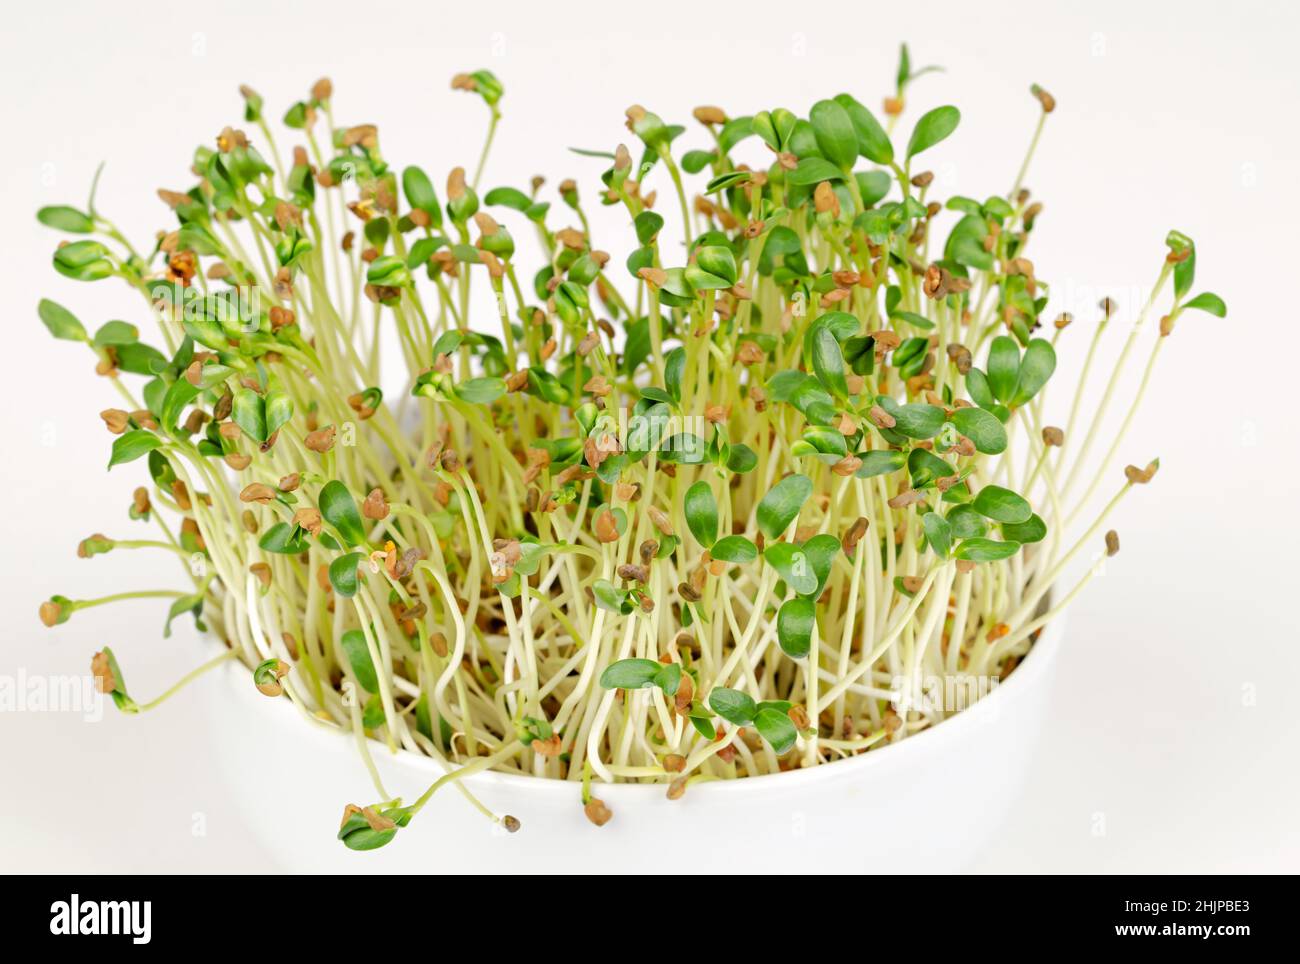 Fenugreek microgreens in white bowl, front view over white. Ready to eat young leaves, shoots, sprouts and cotyledons of Trigonella foenum-graecum. Stock Photo